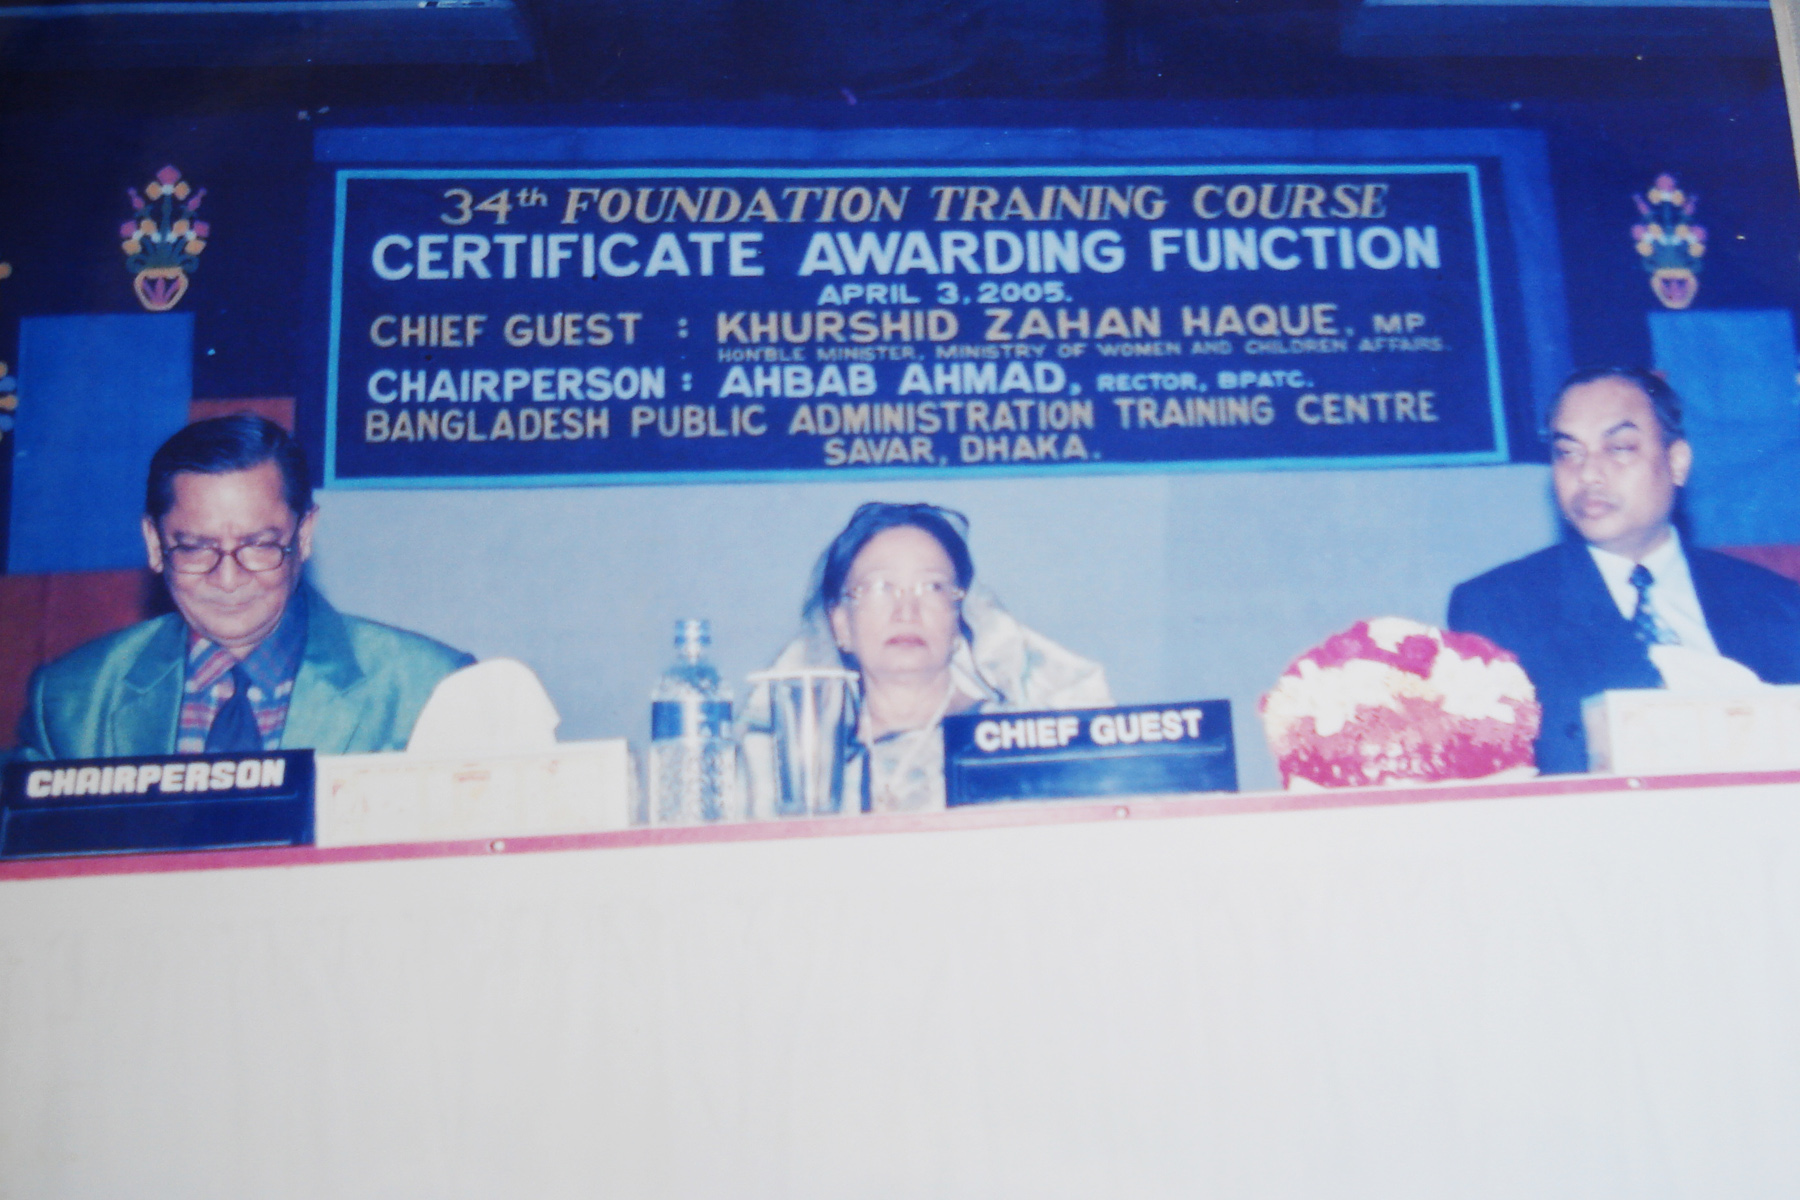 34th FTC Certificate Awarding Function